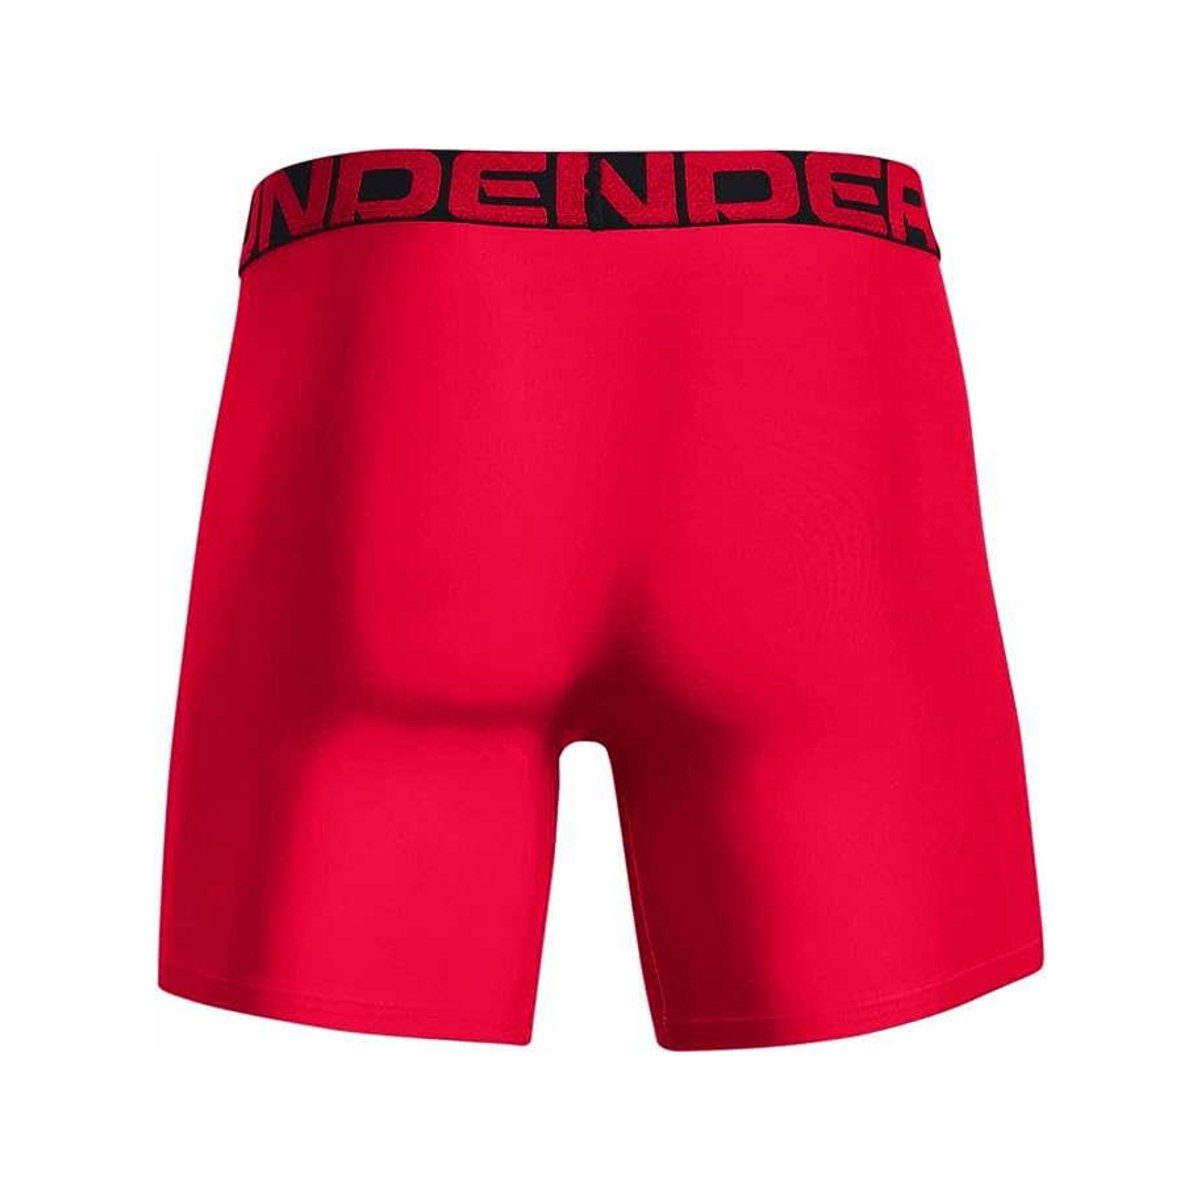 uni (1-St) Armour® Under Boxershorts Red